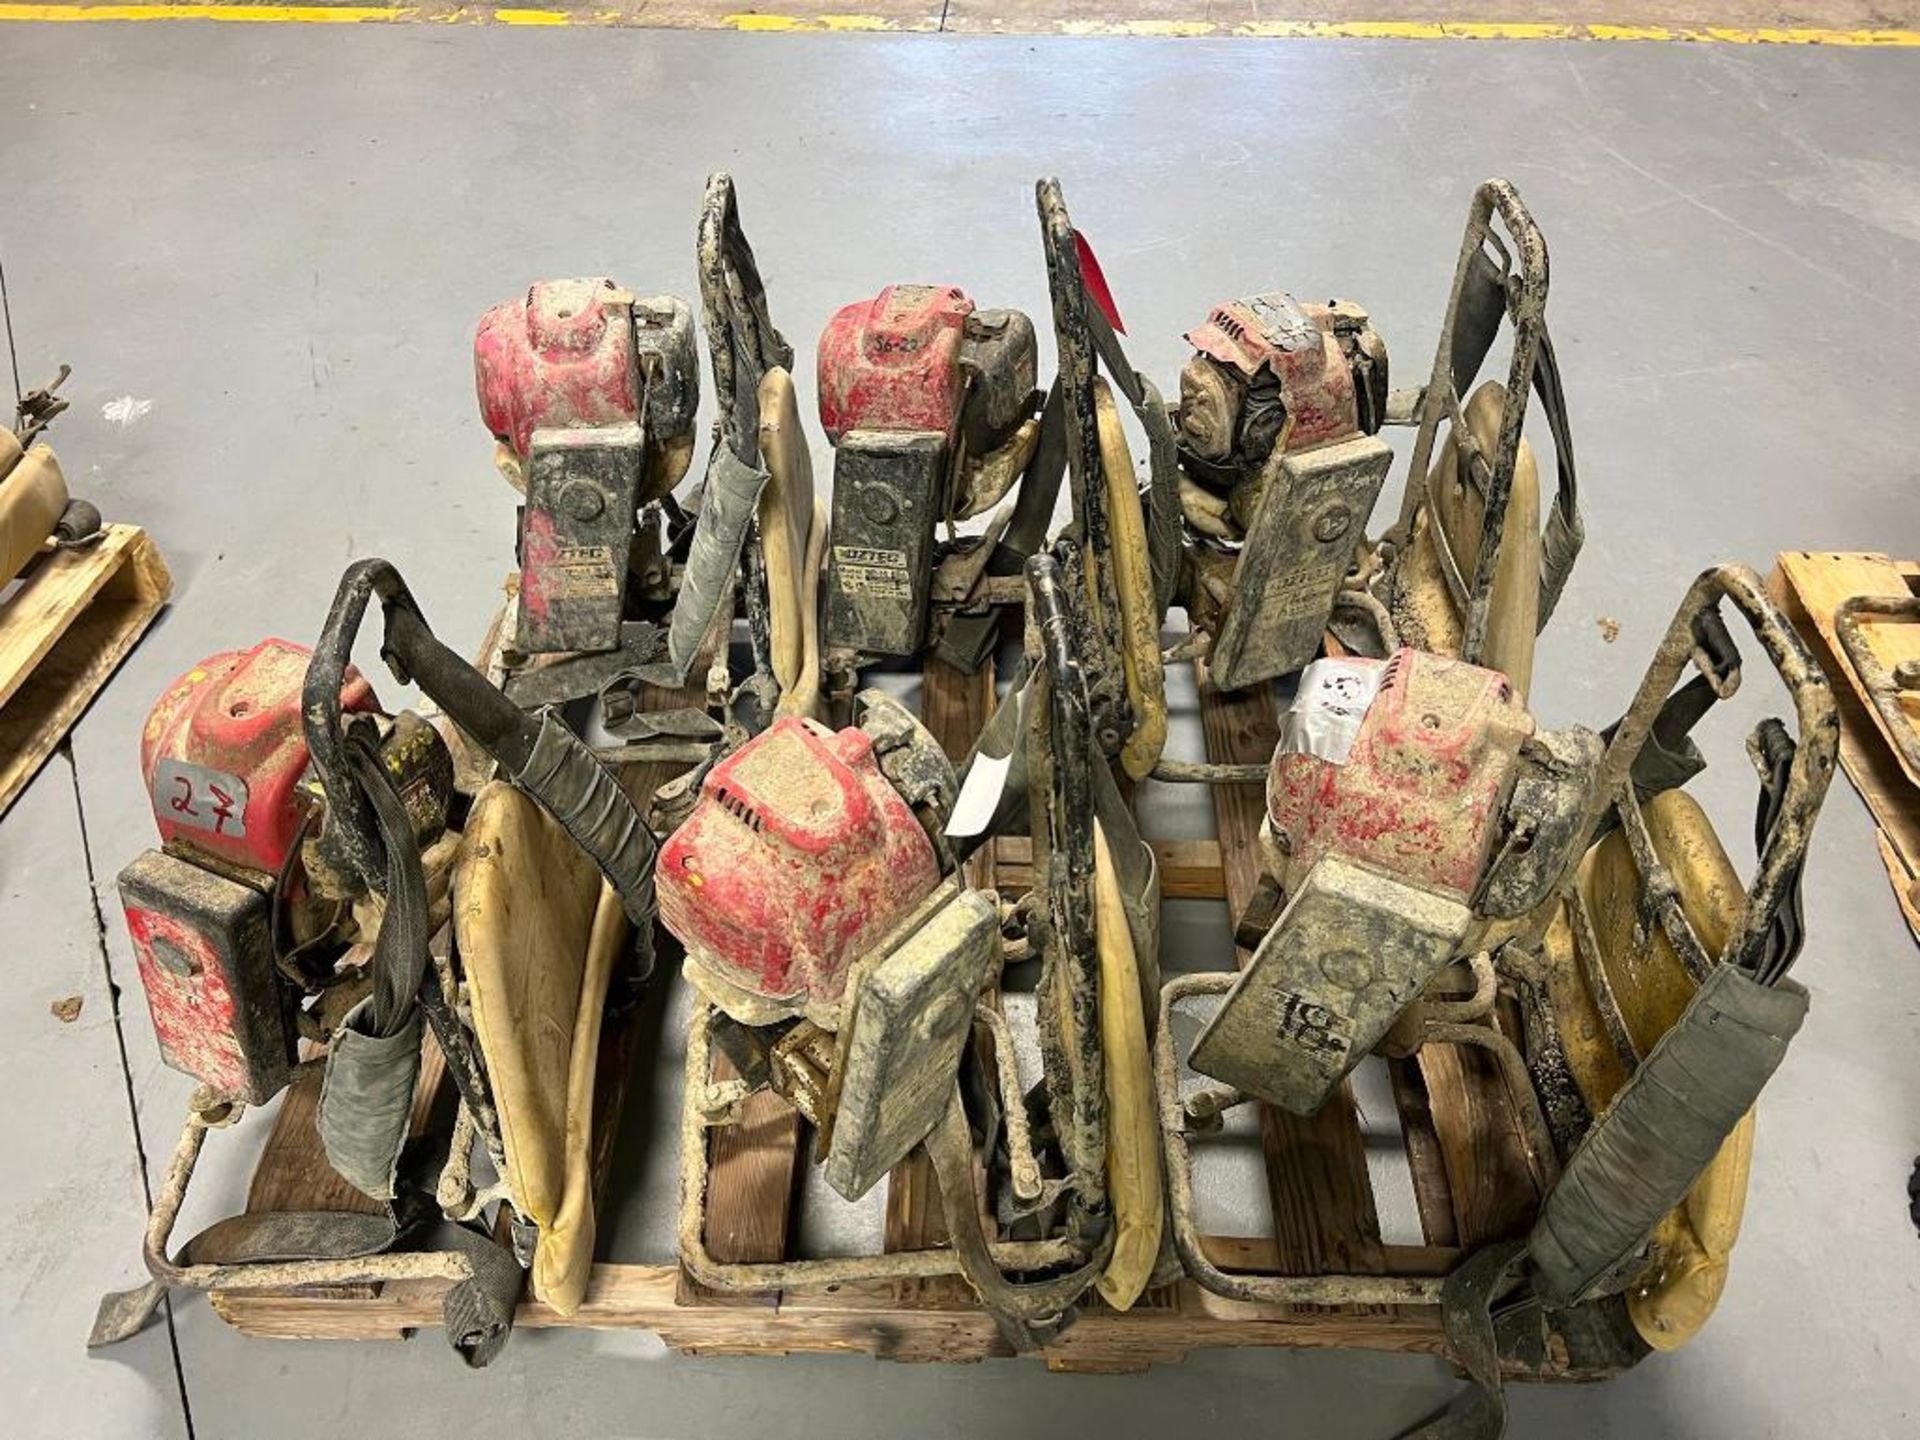 (6) Honda Engine Backpack for Concrete Vibrator. Located in Mt. Pleasant, IA.